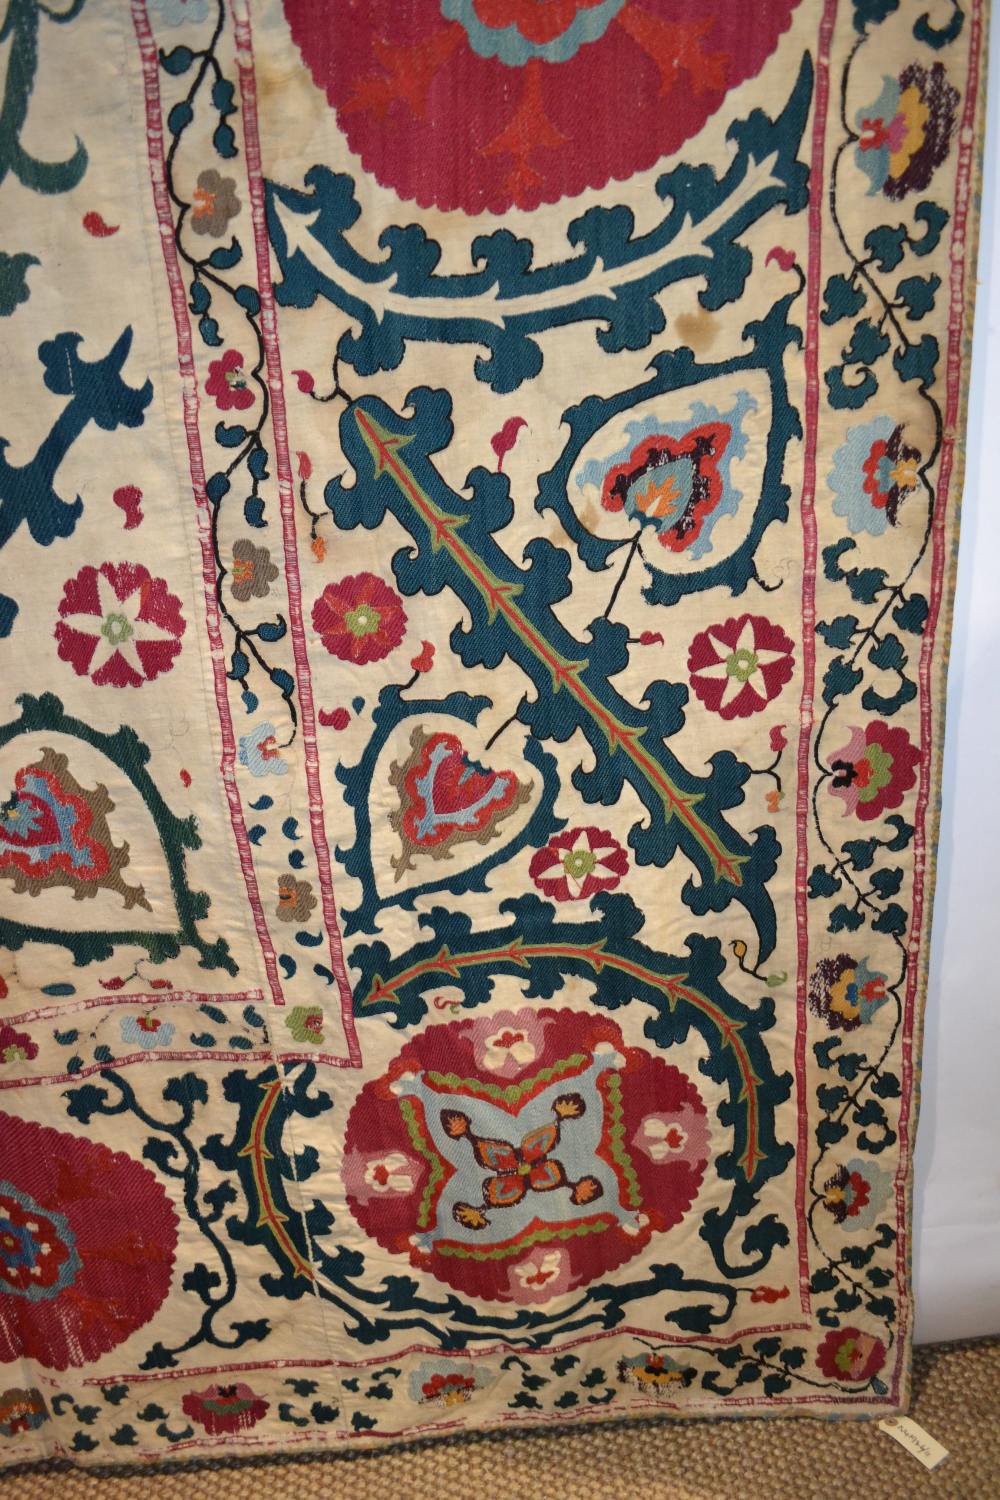 Attractive suzani, probably Bokhara, Uzbekistan, late 19th/early 20th century, cotton ground - Image 2 of 8